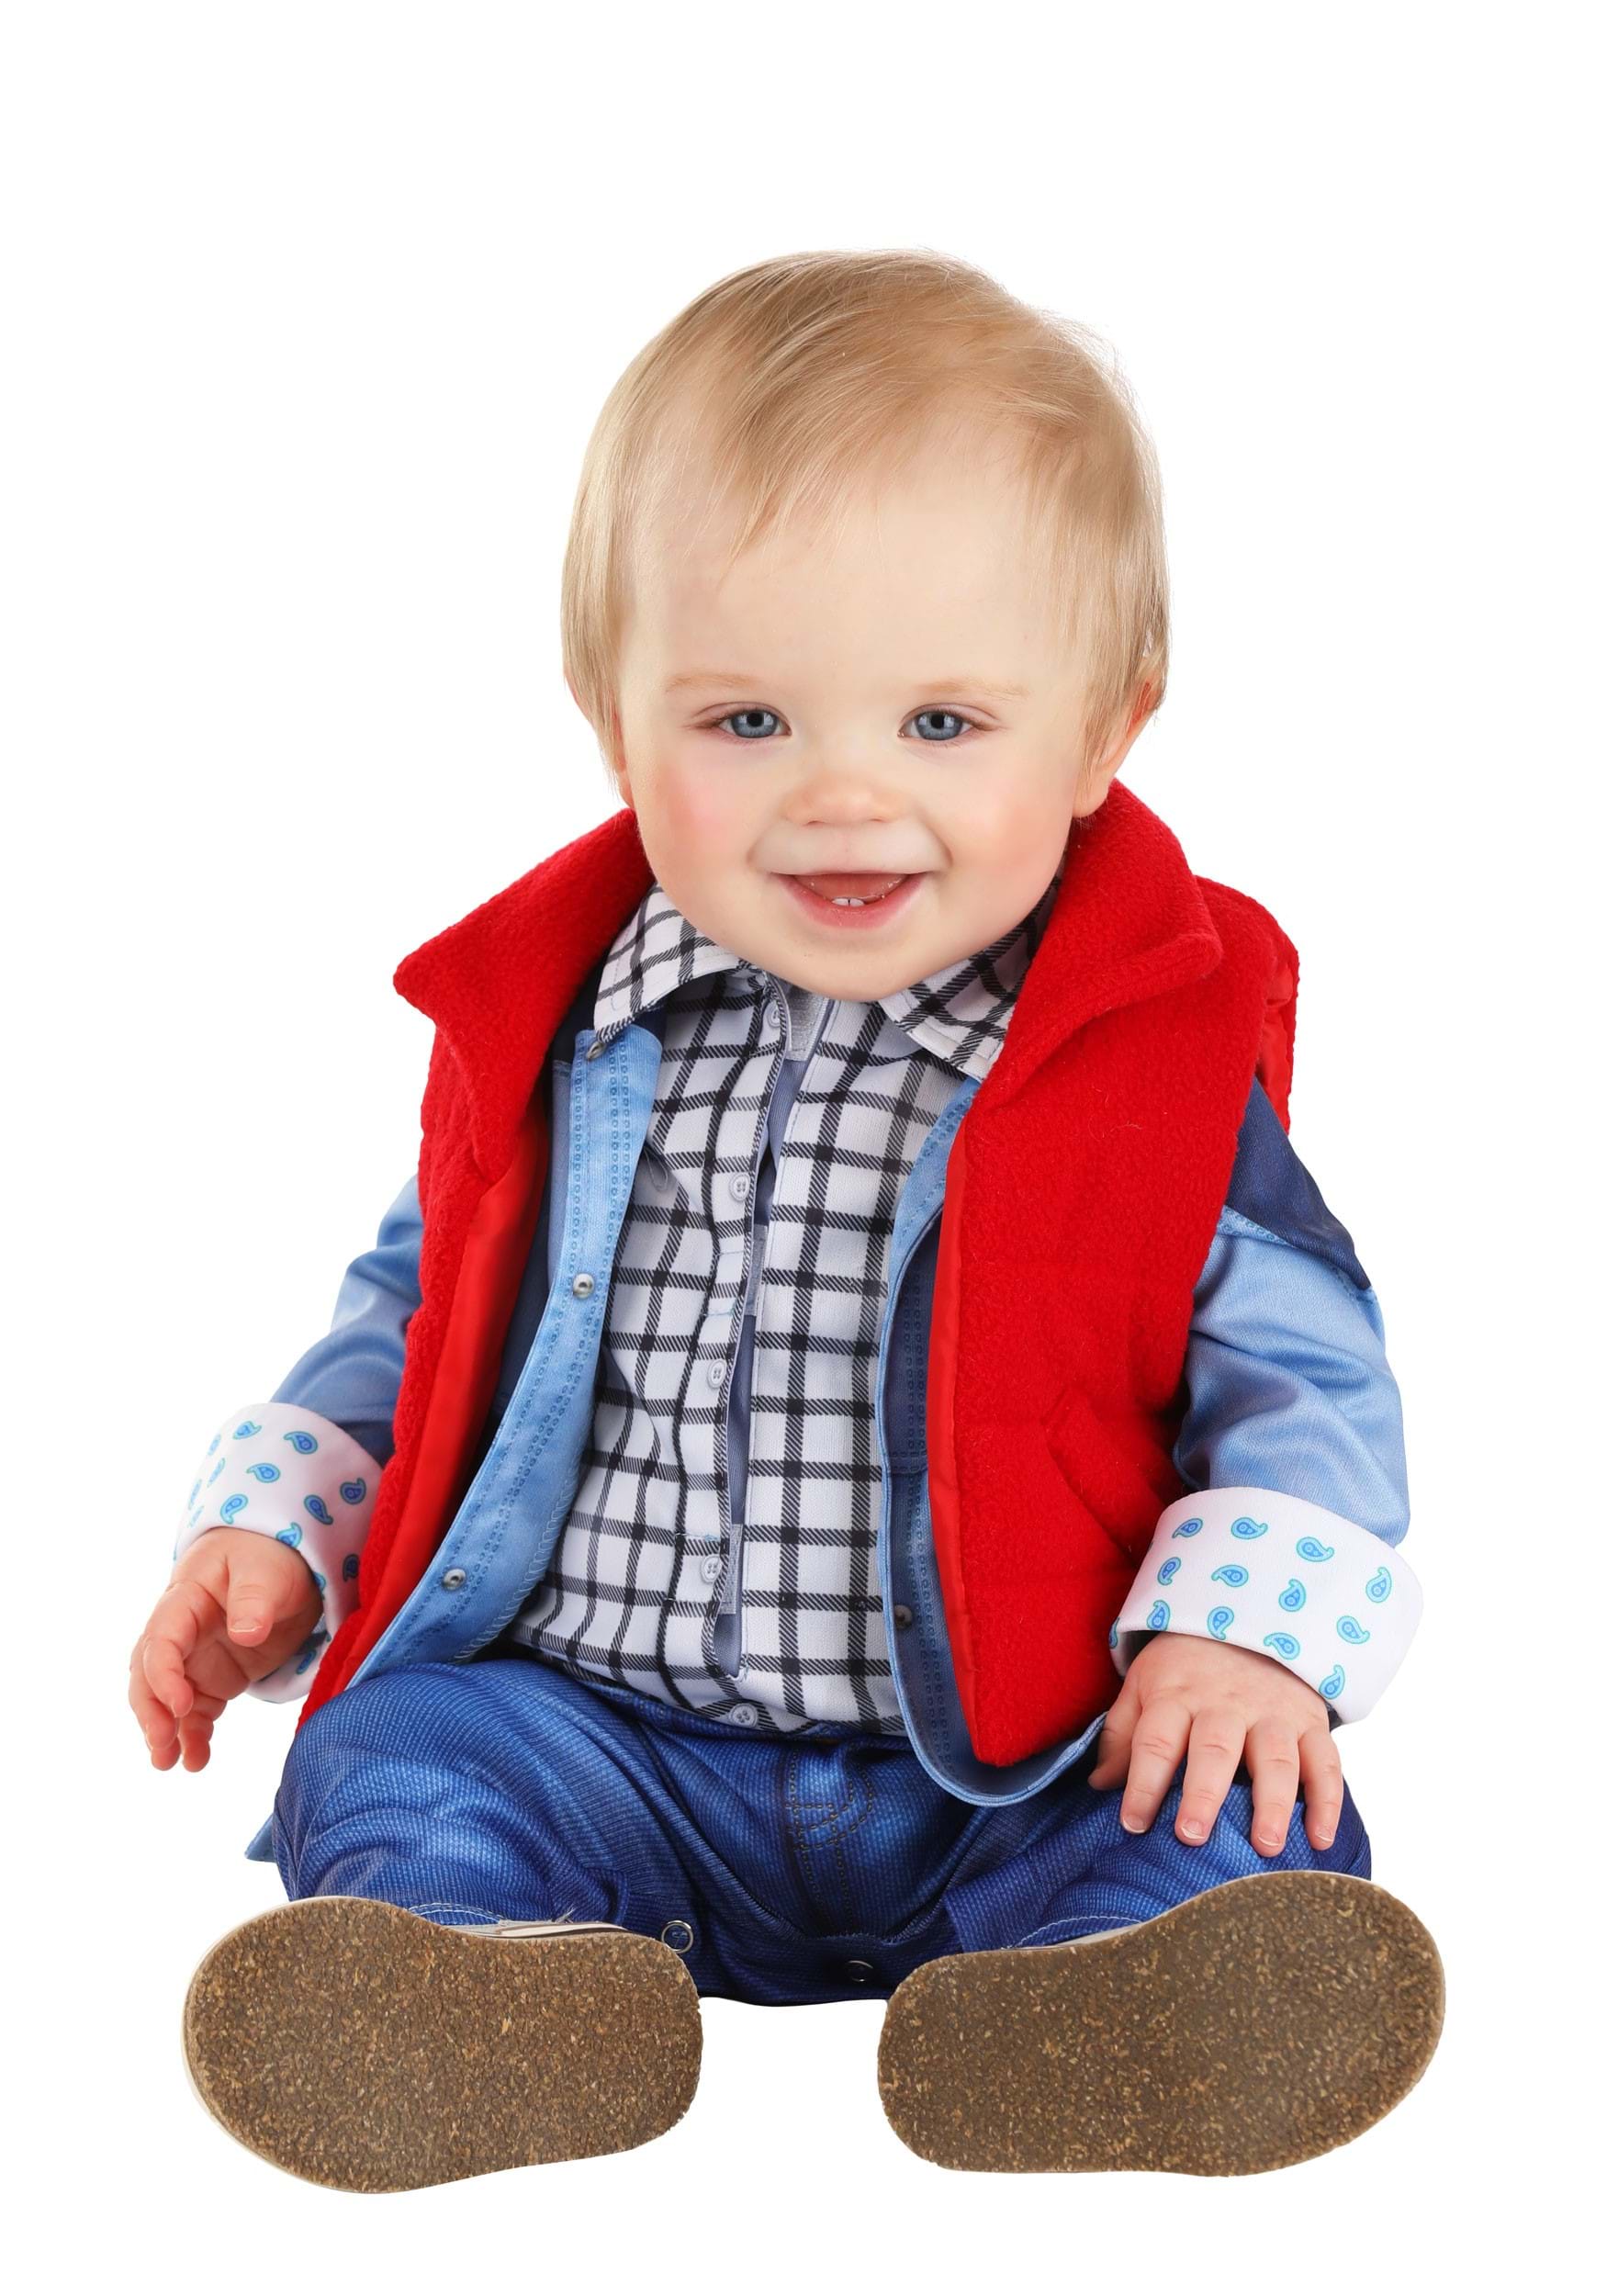 Photos - Fancy Dress FUN Costumes Back to the Future Marty McFly Costume for Infants Blue/R